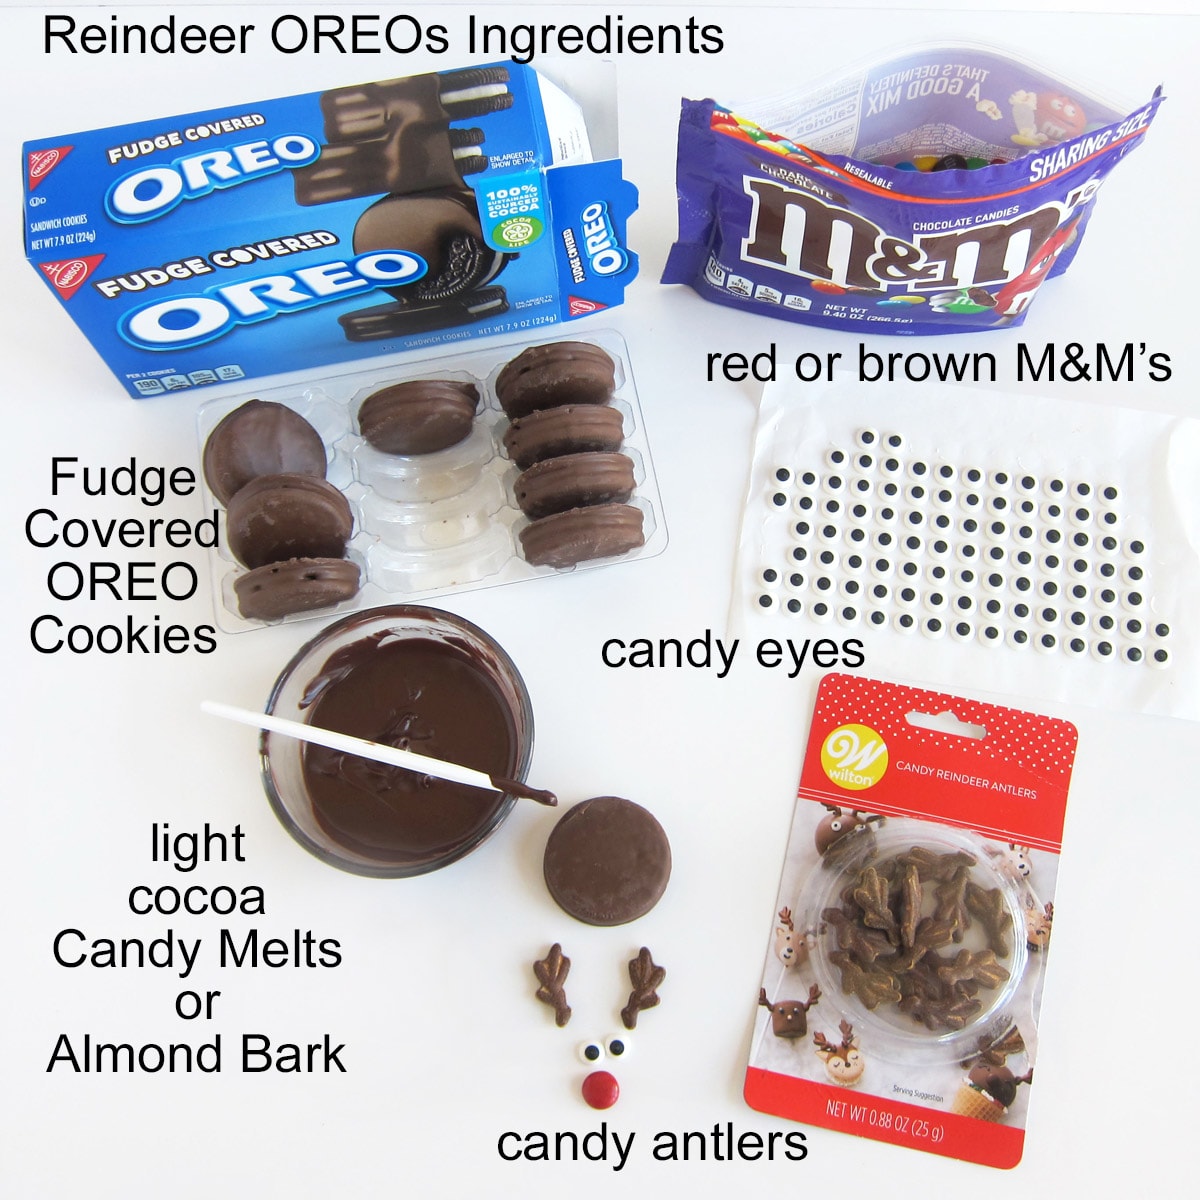 reindeer oreo cookie ingredients including candy antlers, candy eyes, M&M's, candy melts, and fudge covered OREOs. 